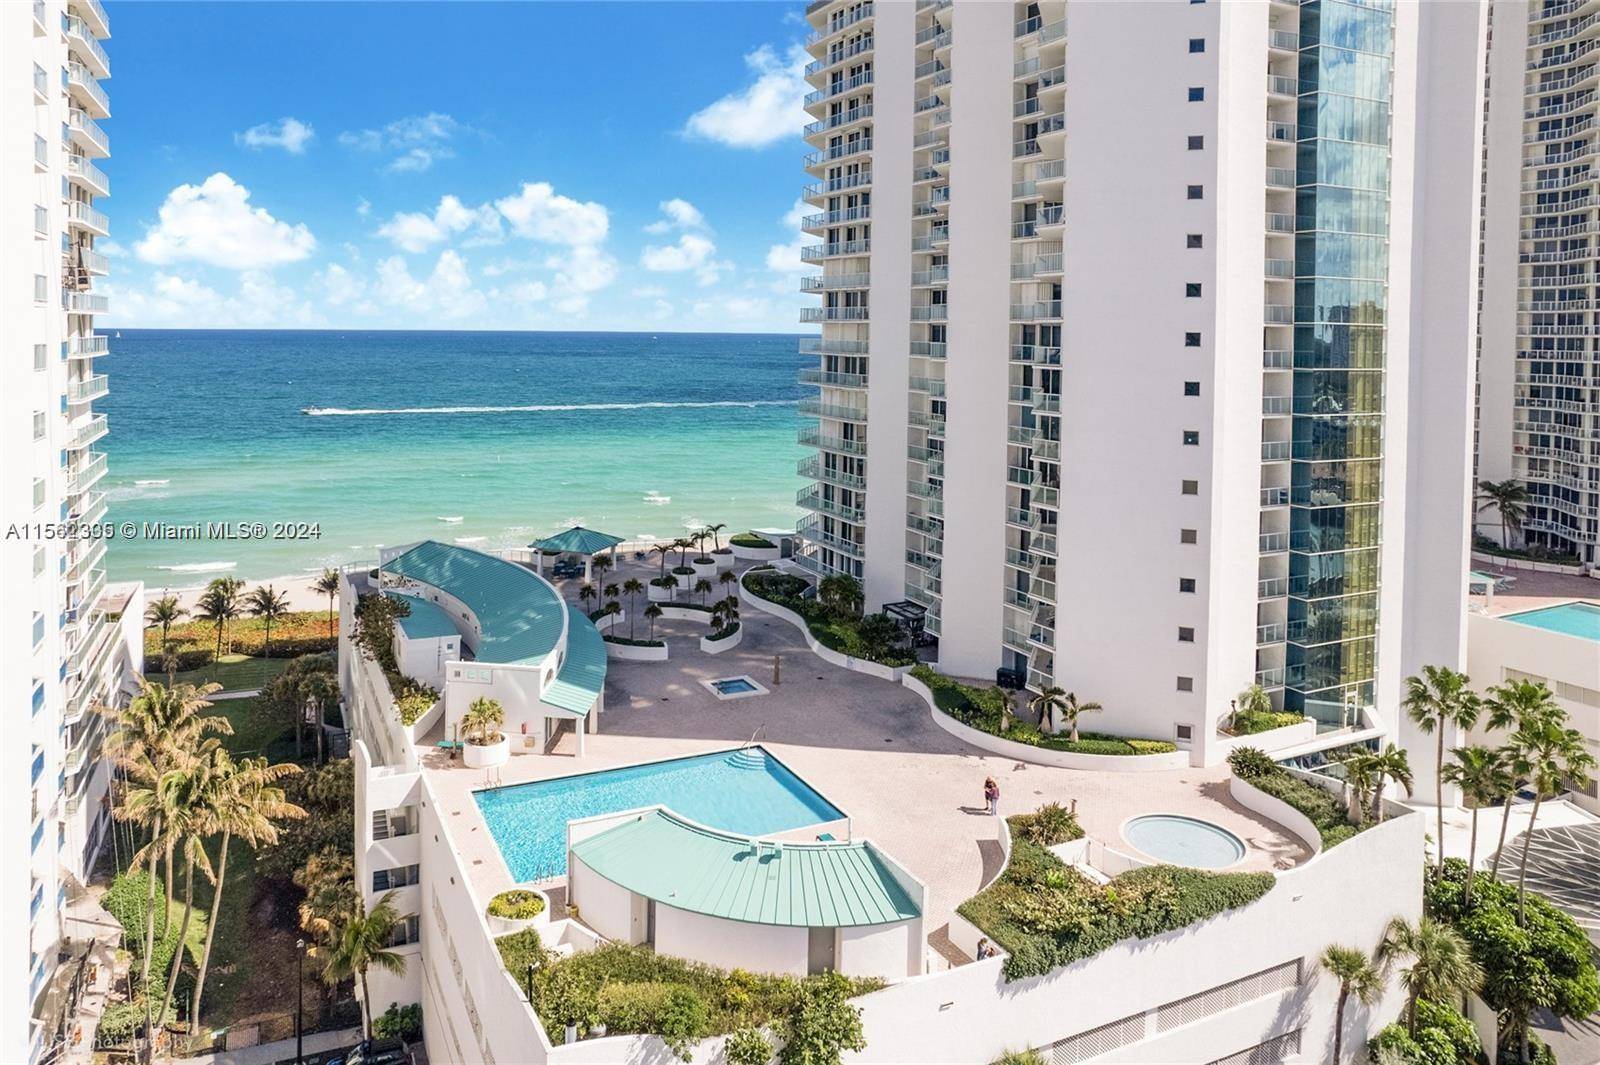 This unique 3 bedroom 3. 5 bath oceanfront residence located in prestigious Sunny Isles offers an oversized terrace in with ocean views.